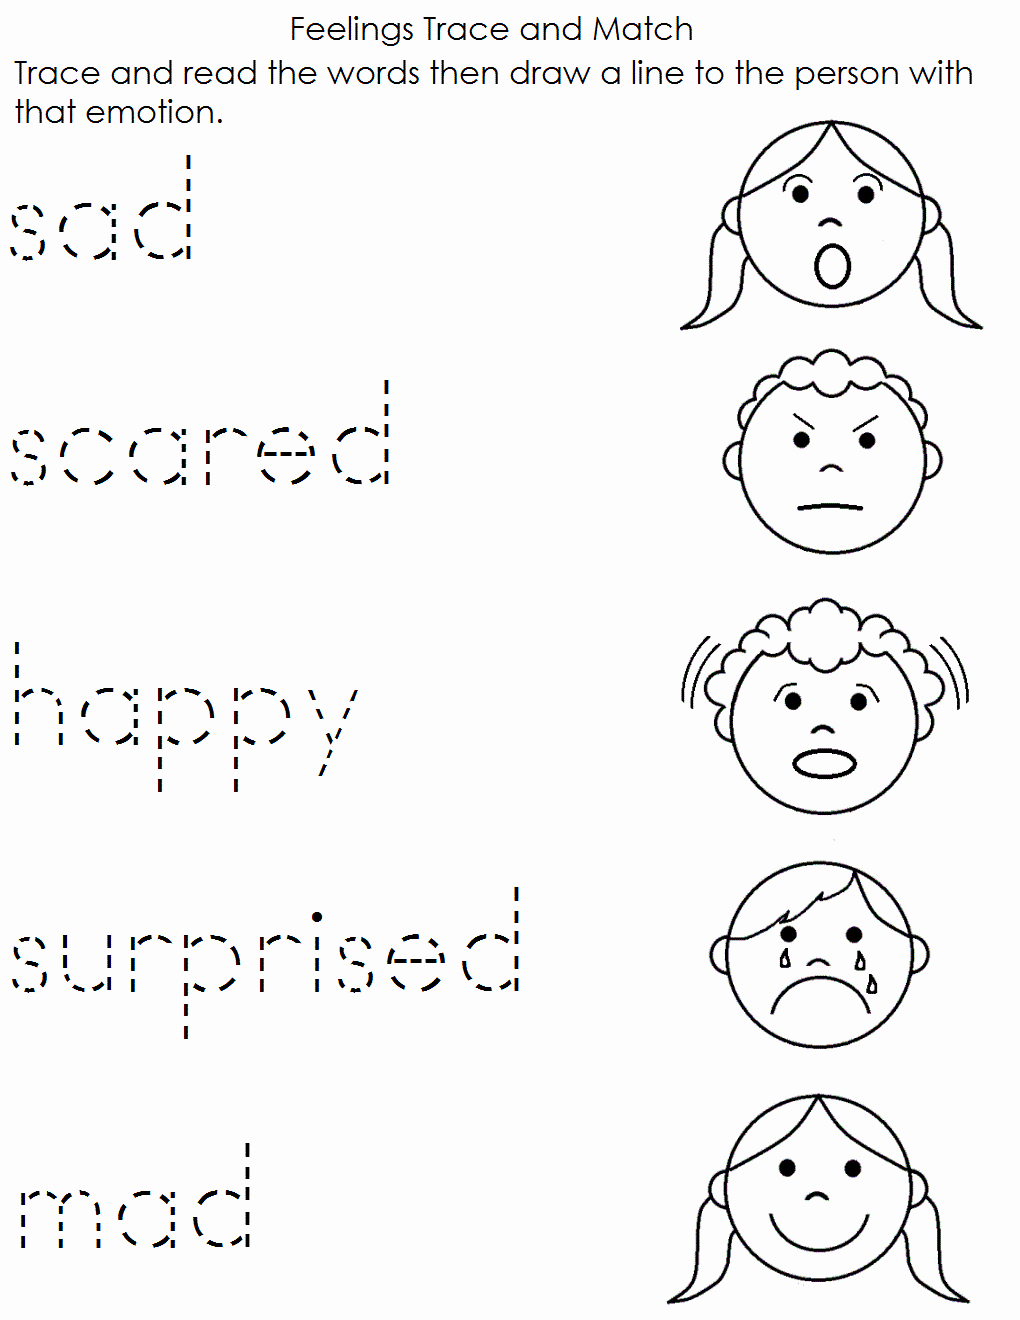 Emotions Worksheets for Preschoolers Unique A Child S Place Feelings Worksheet